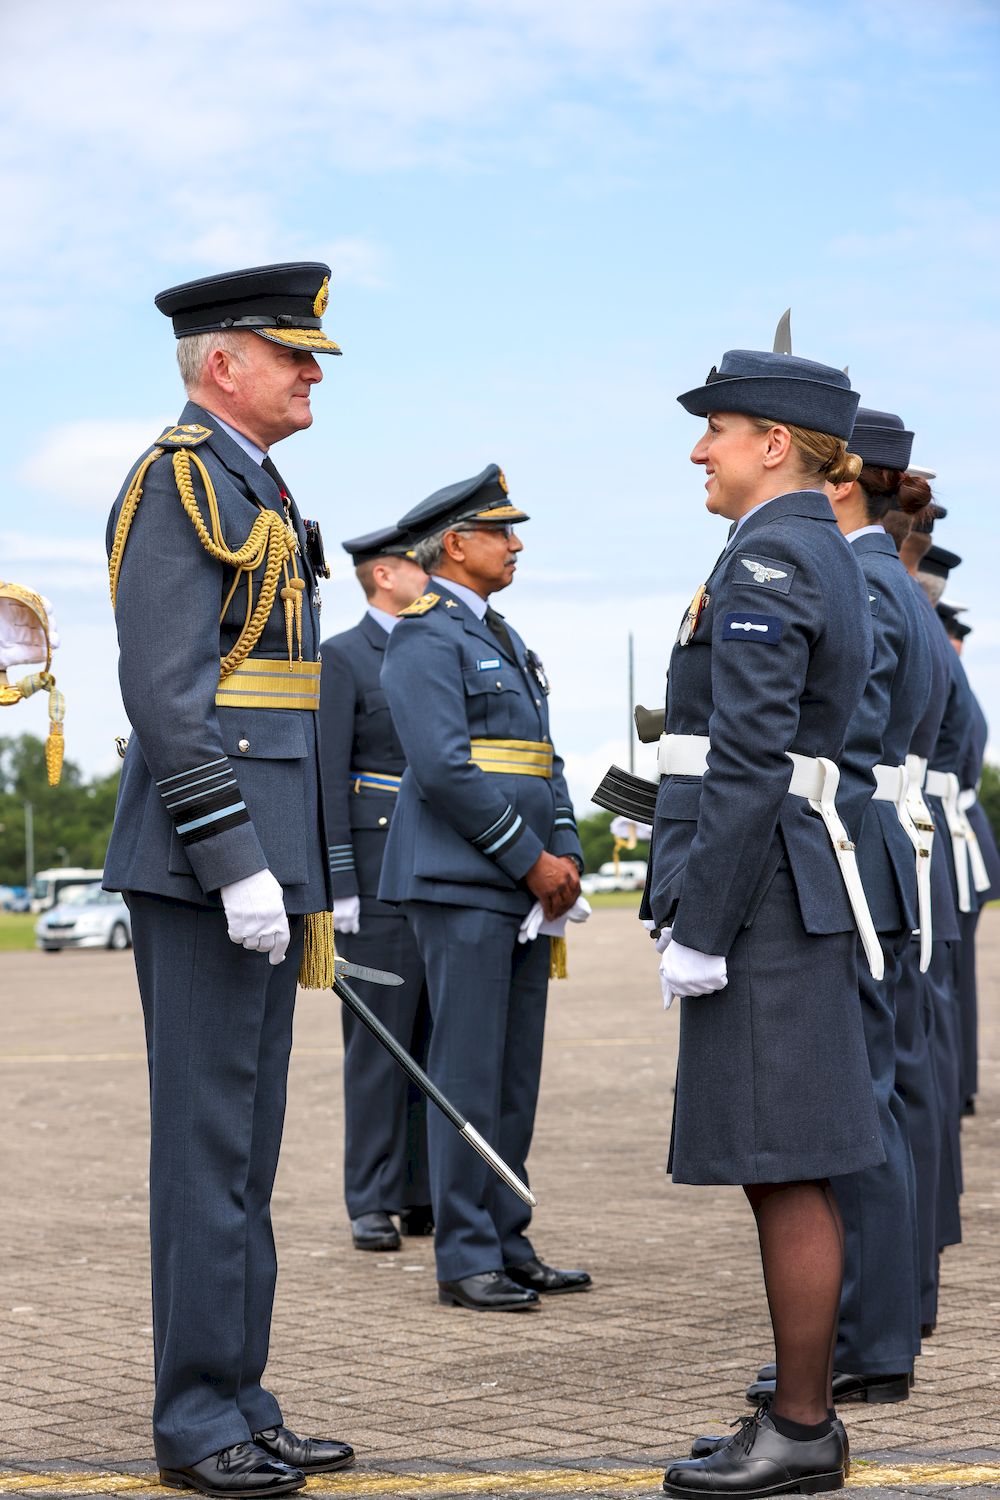 The parade's reviewing Officer is smiling and talking to members of the RAF who are on parade in their uniforms. 